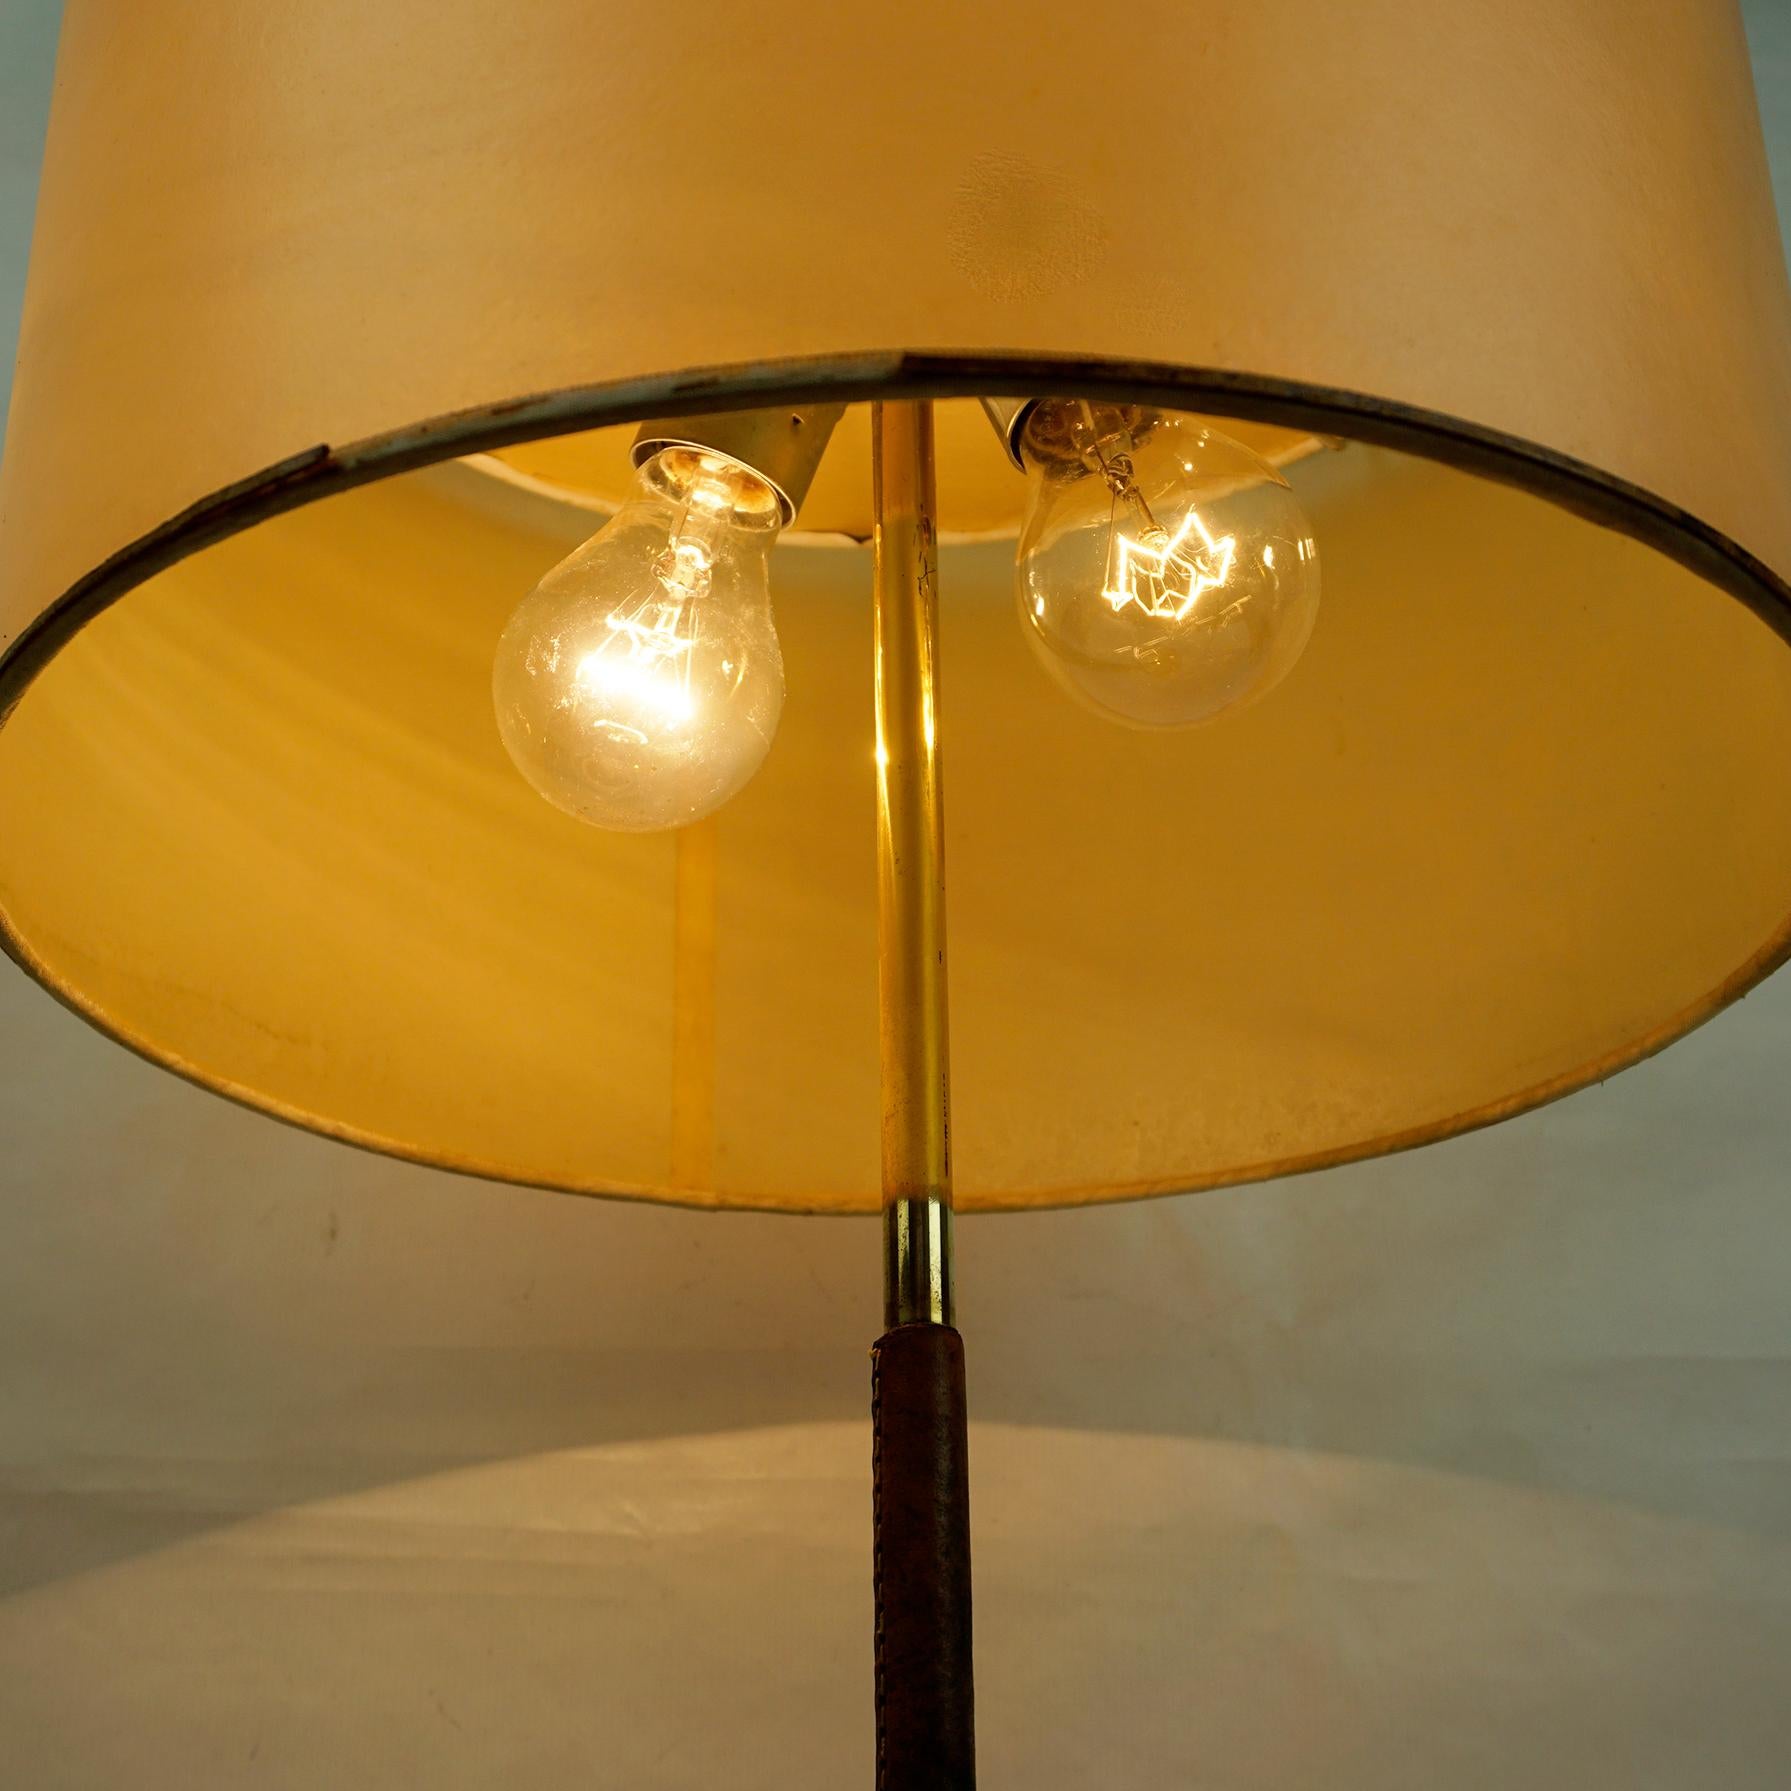 Austrian Midcentury Brass and Leather Table Lamp Mod. 1268 Essen by J. T. Kalmar For Sale 5